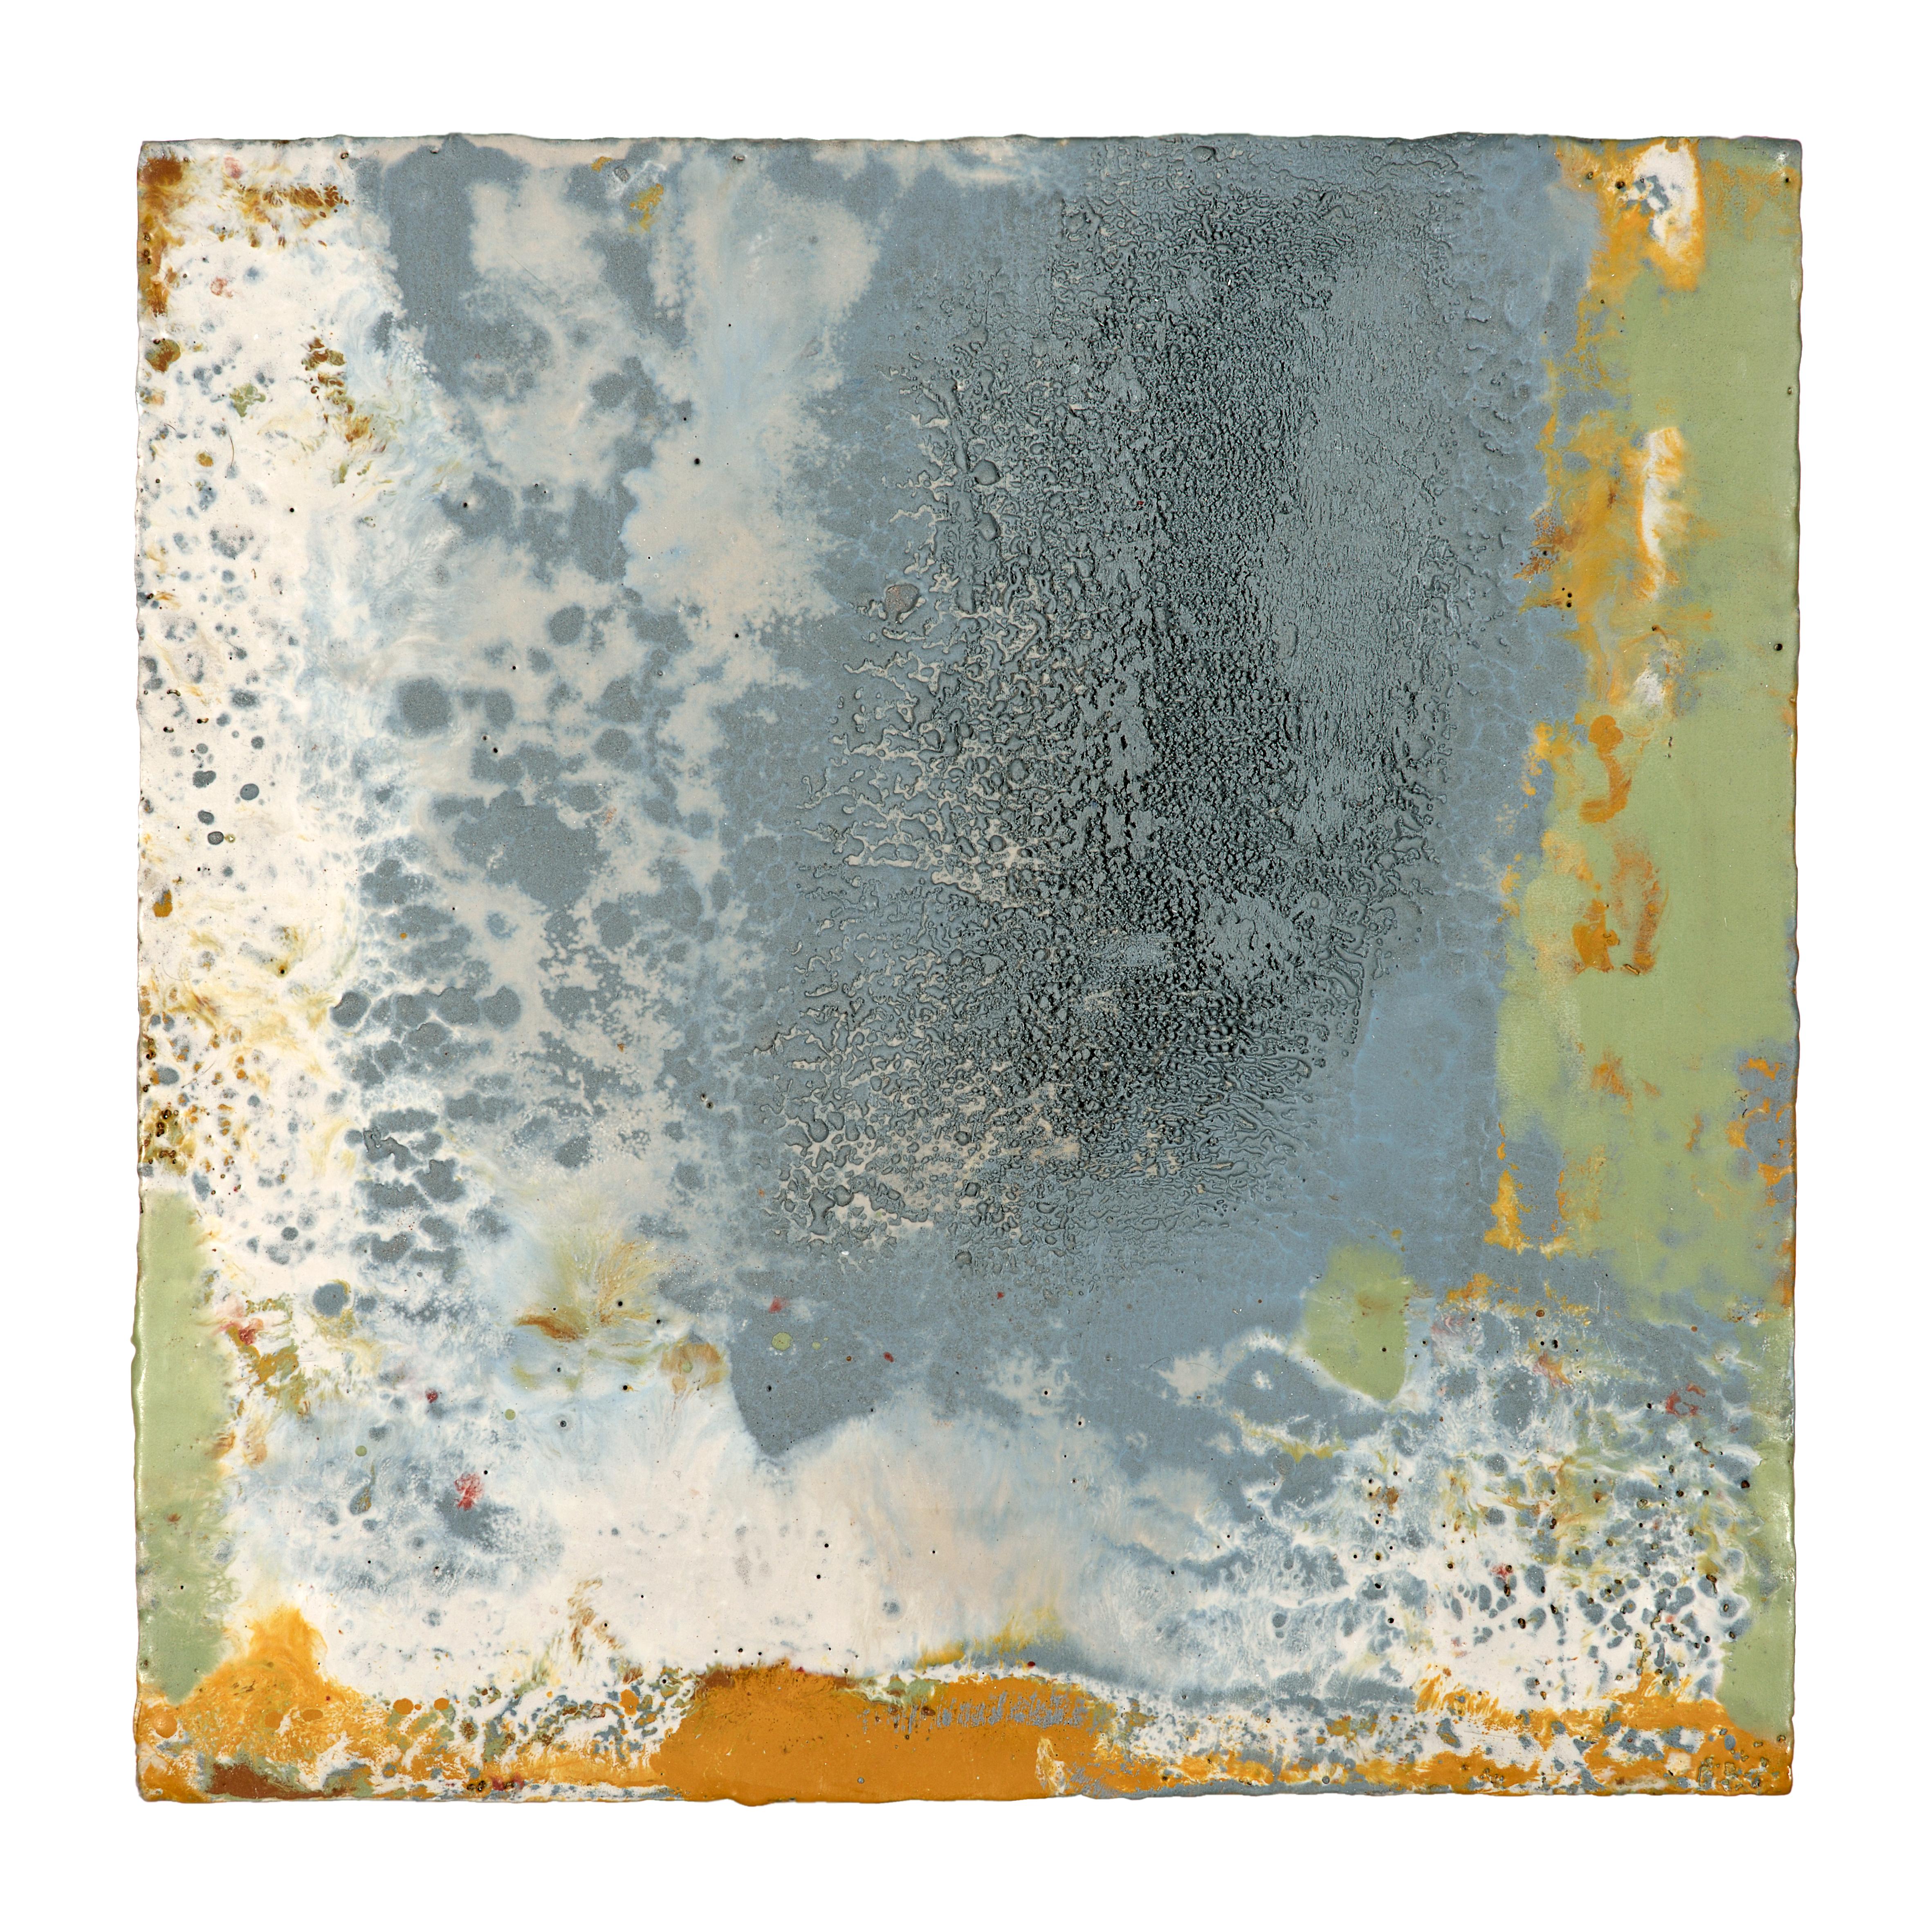 Contemporary Richard Hirsch Encaustic Painting of Nothing #72, 2021 For Sale